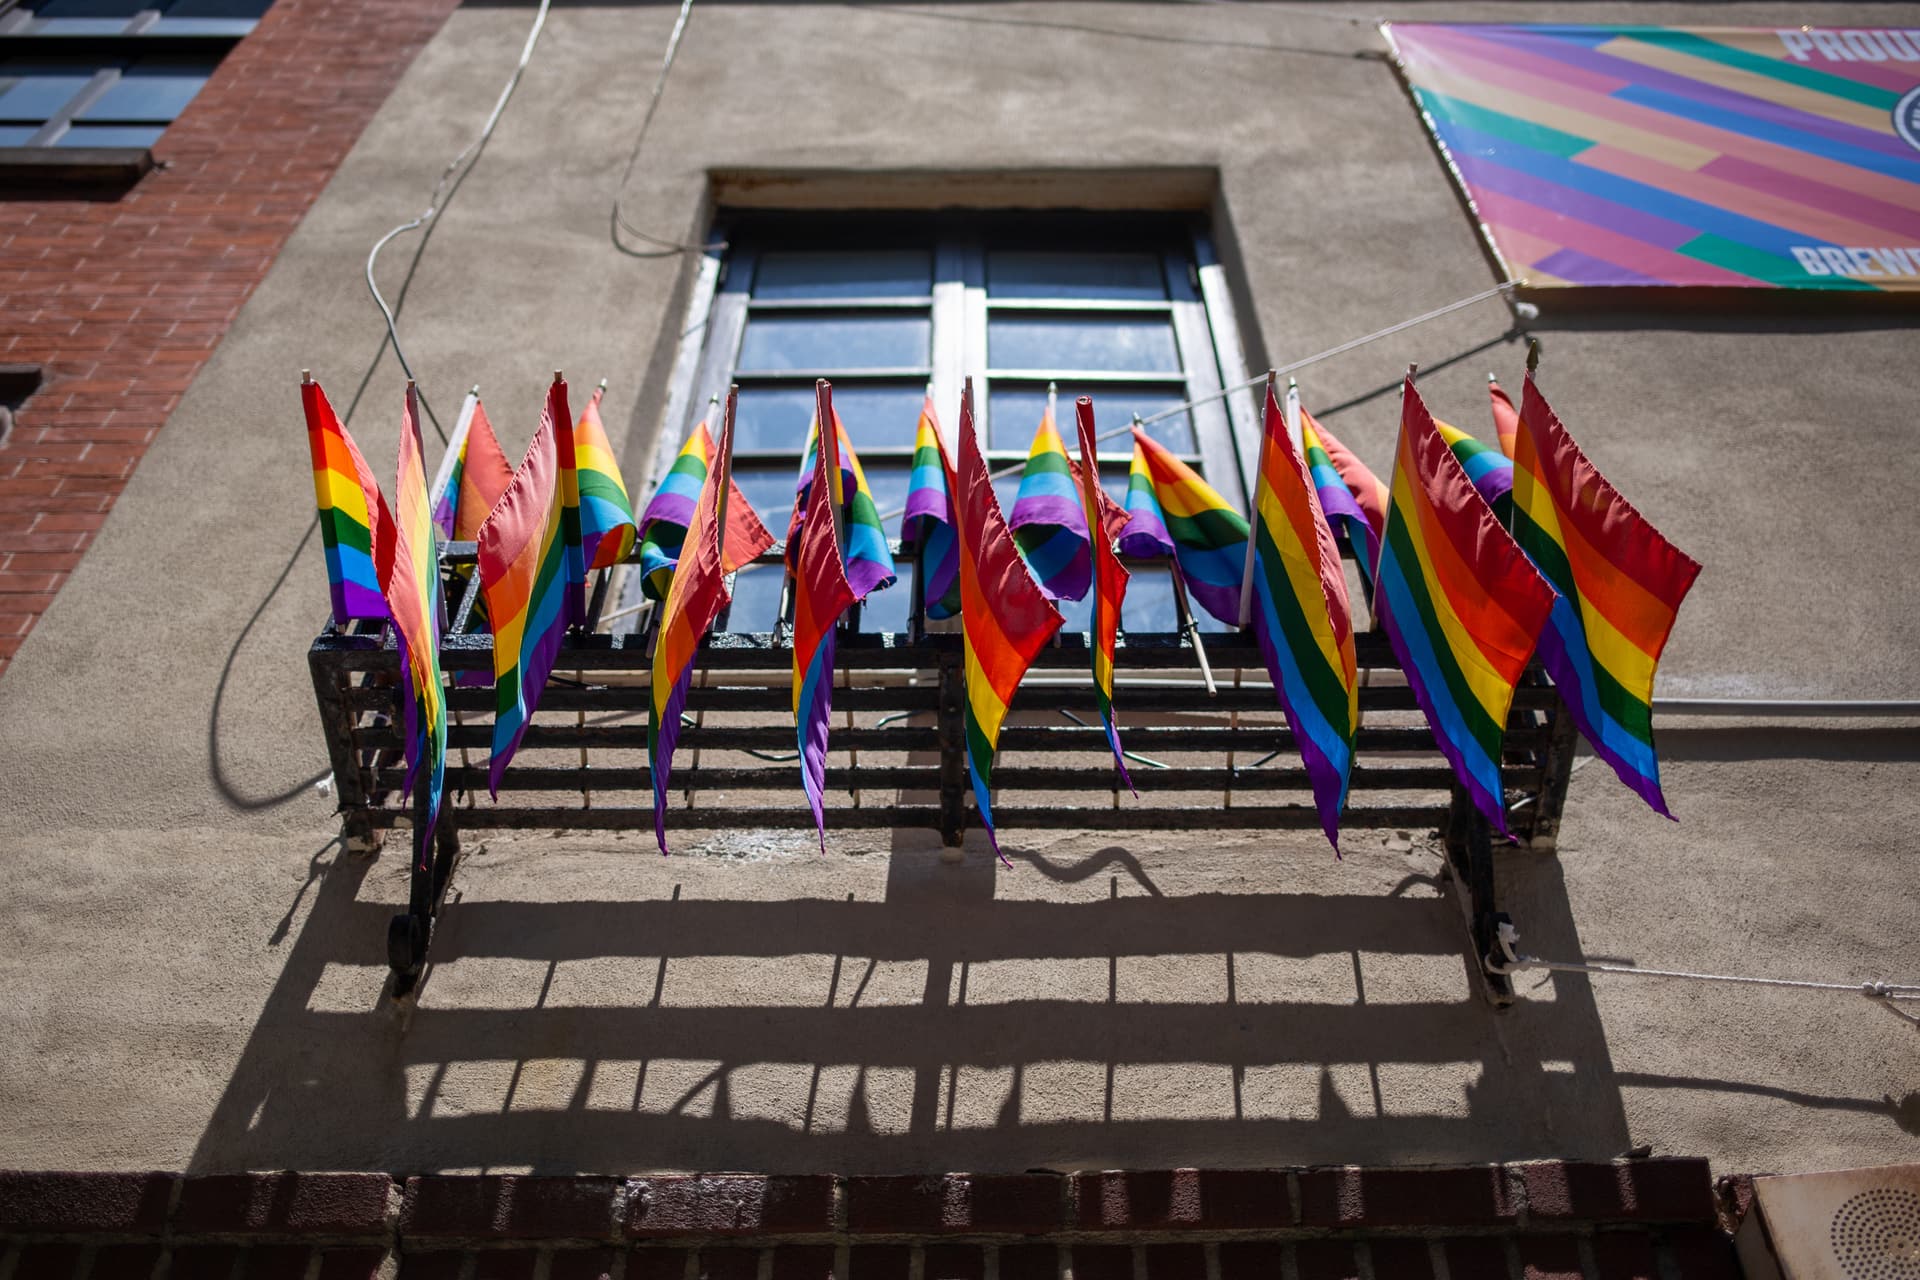 The Stonewall Inn is more than just a bar—it’s the birthplace of the LGBTQ rights movement